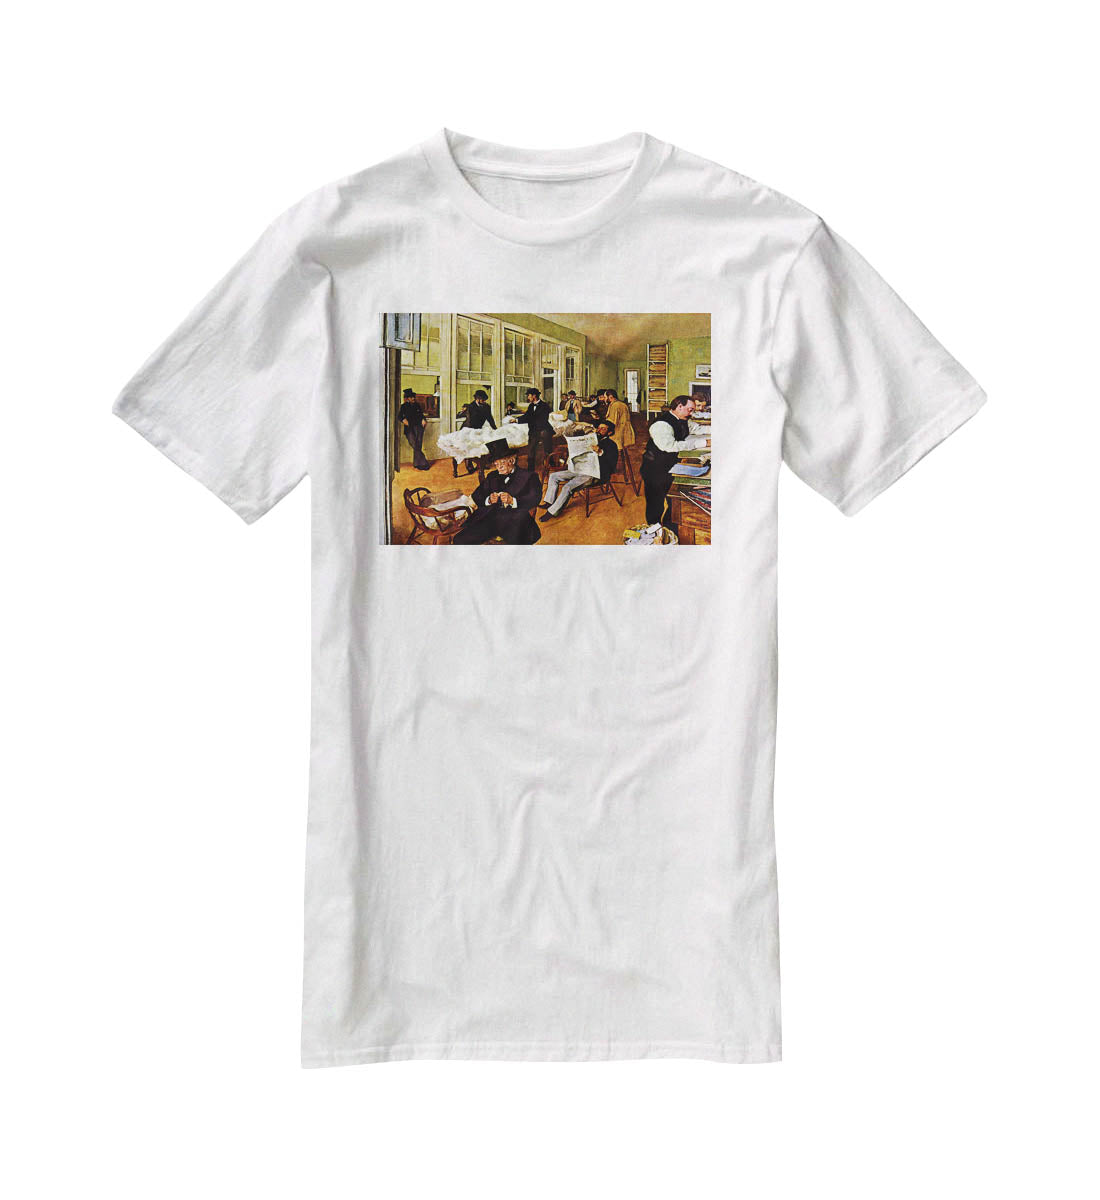 The cotton office in New Orleans by Degas T-Shirt - Canvas Art Rocks - 5